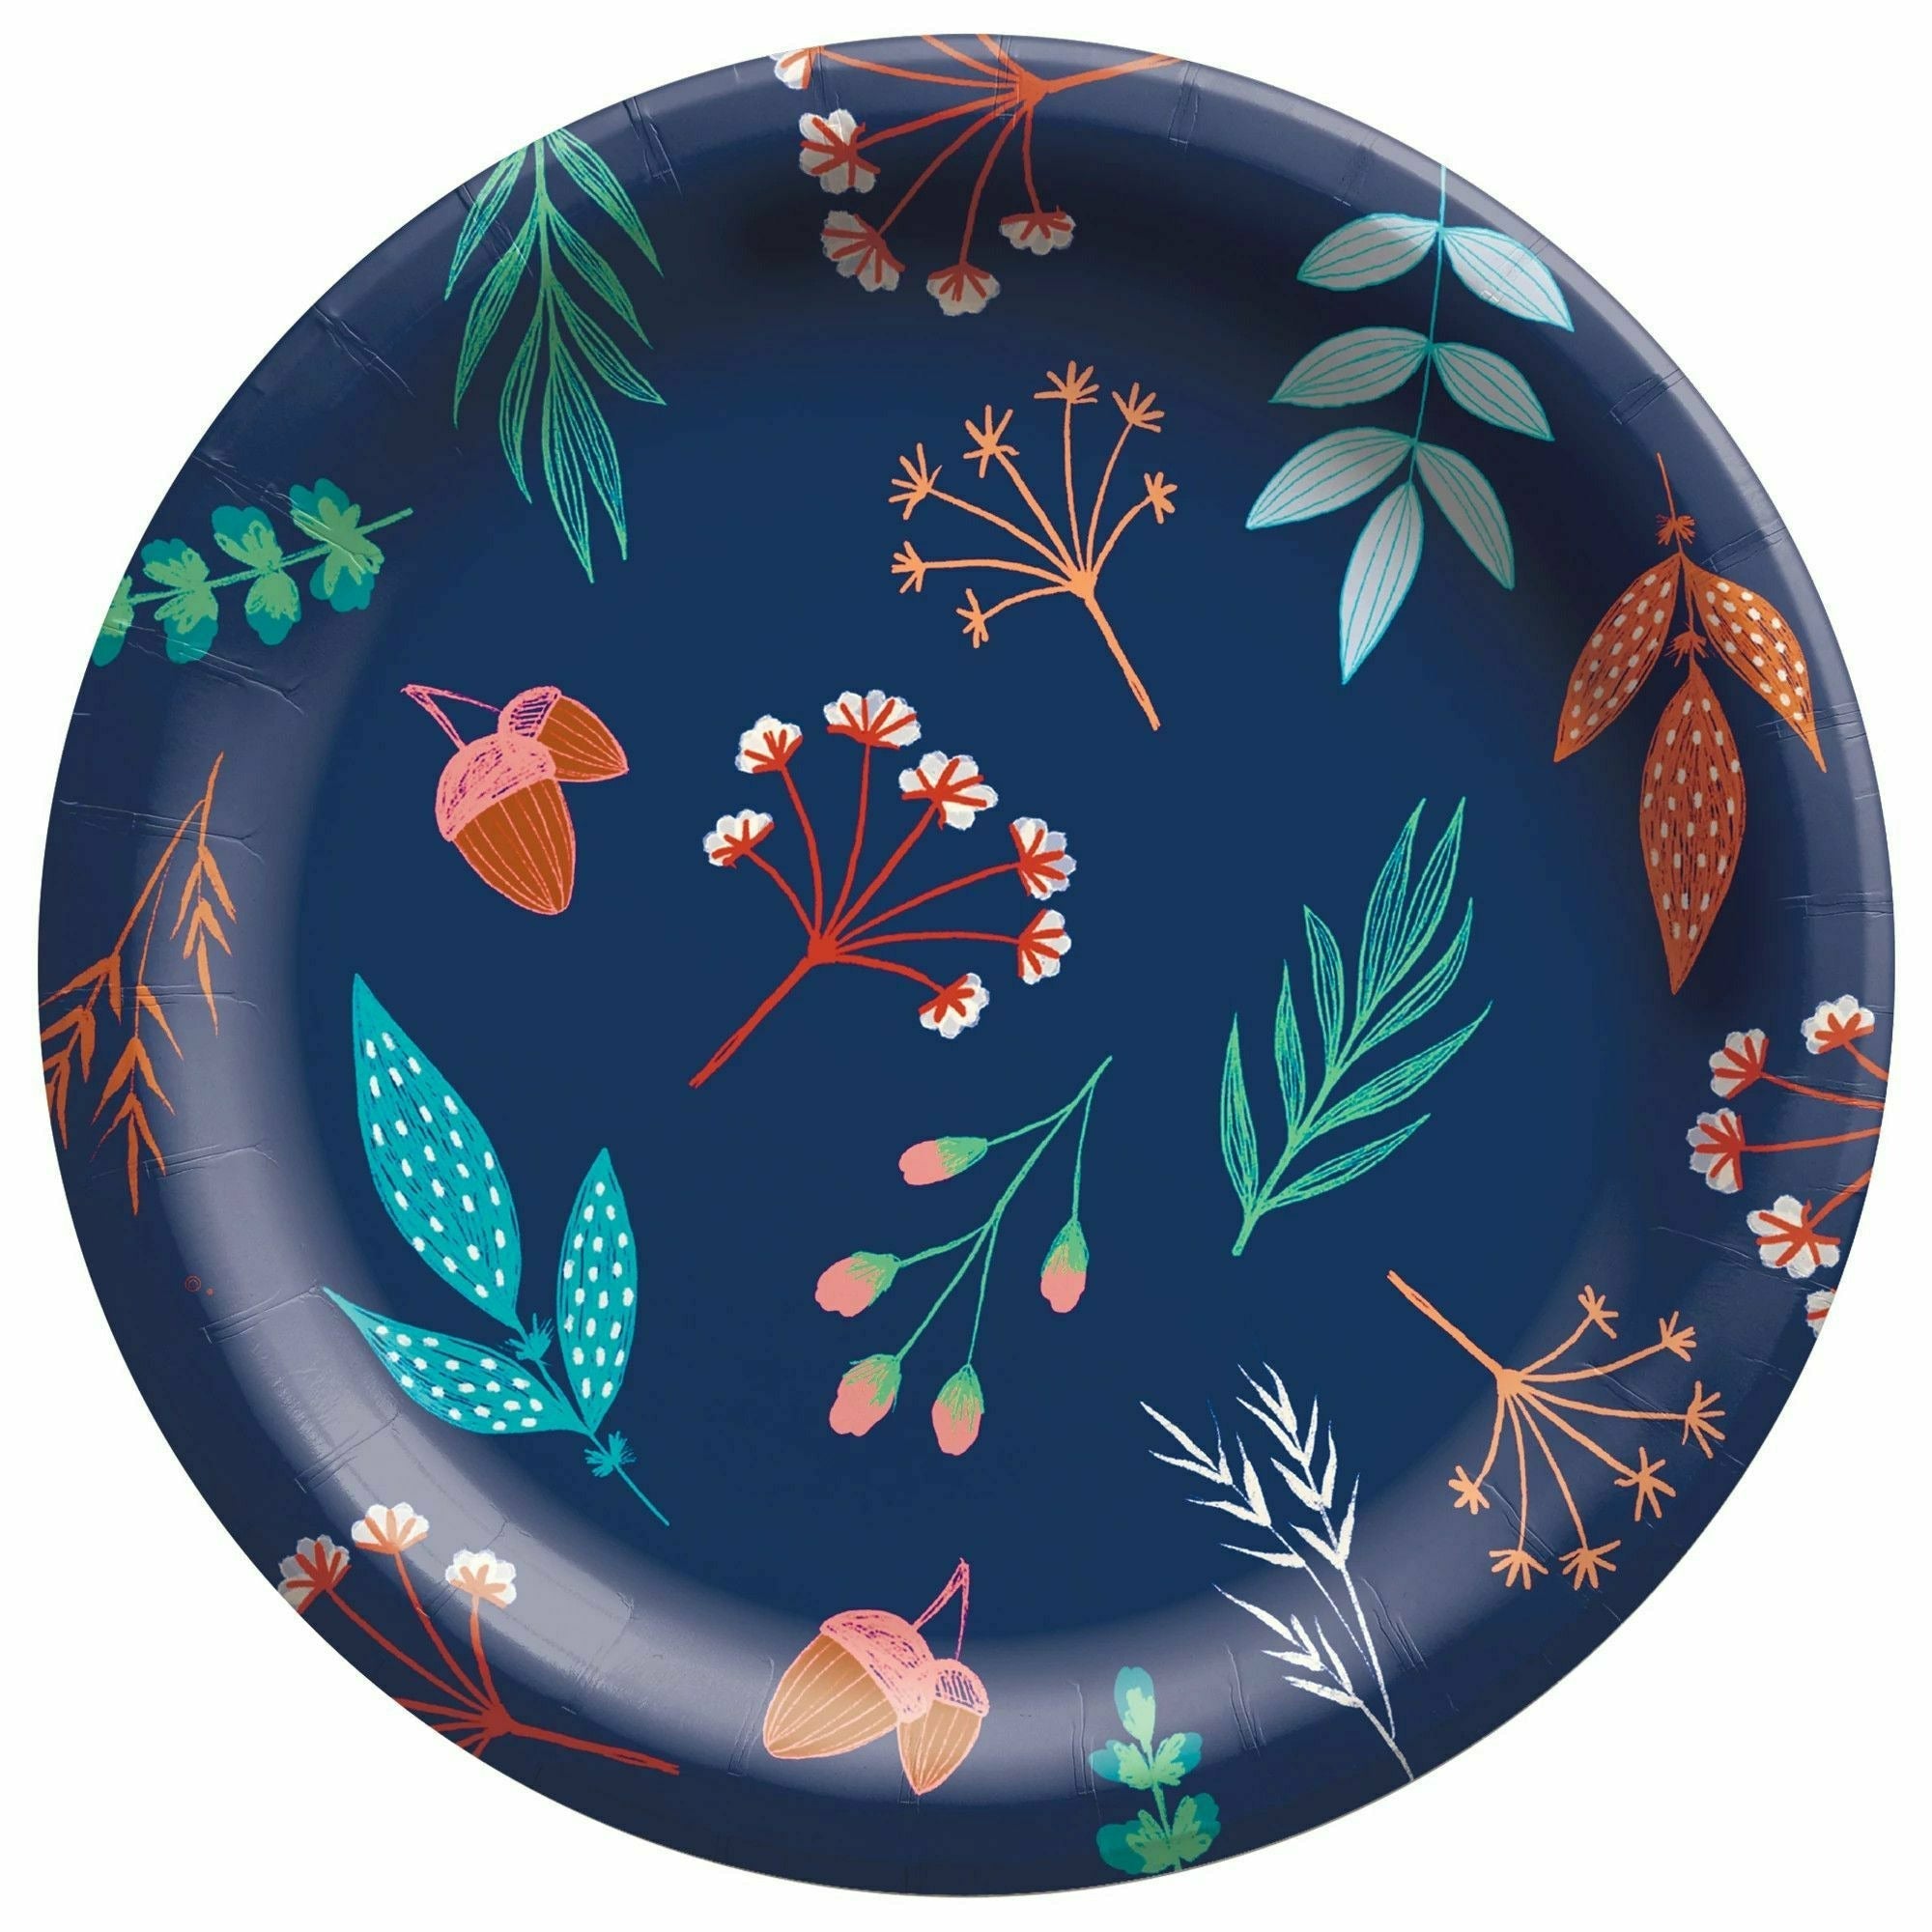 Amscan HOLIDAY: FALL Fall Gather 6 3/4" Round Plate